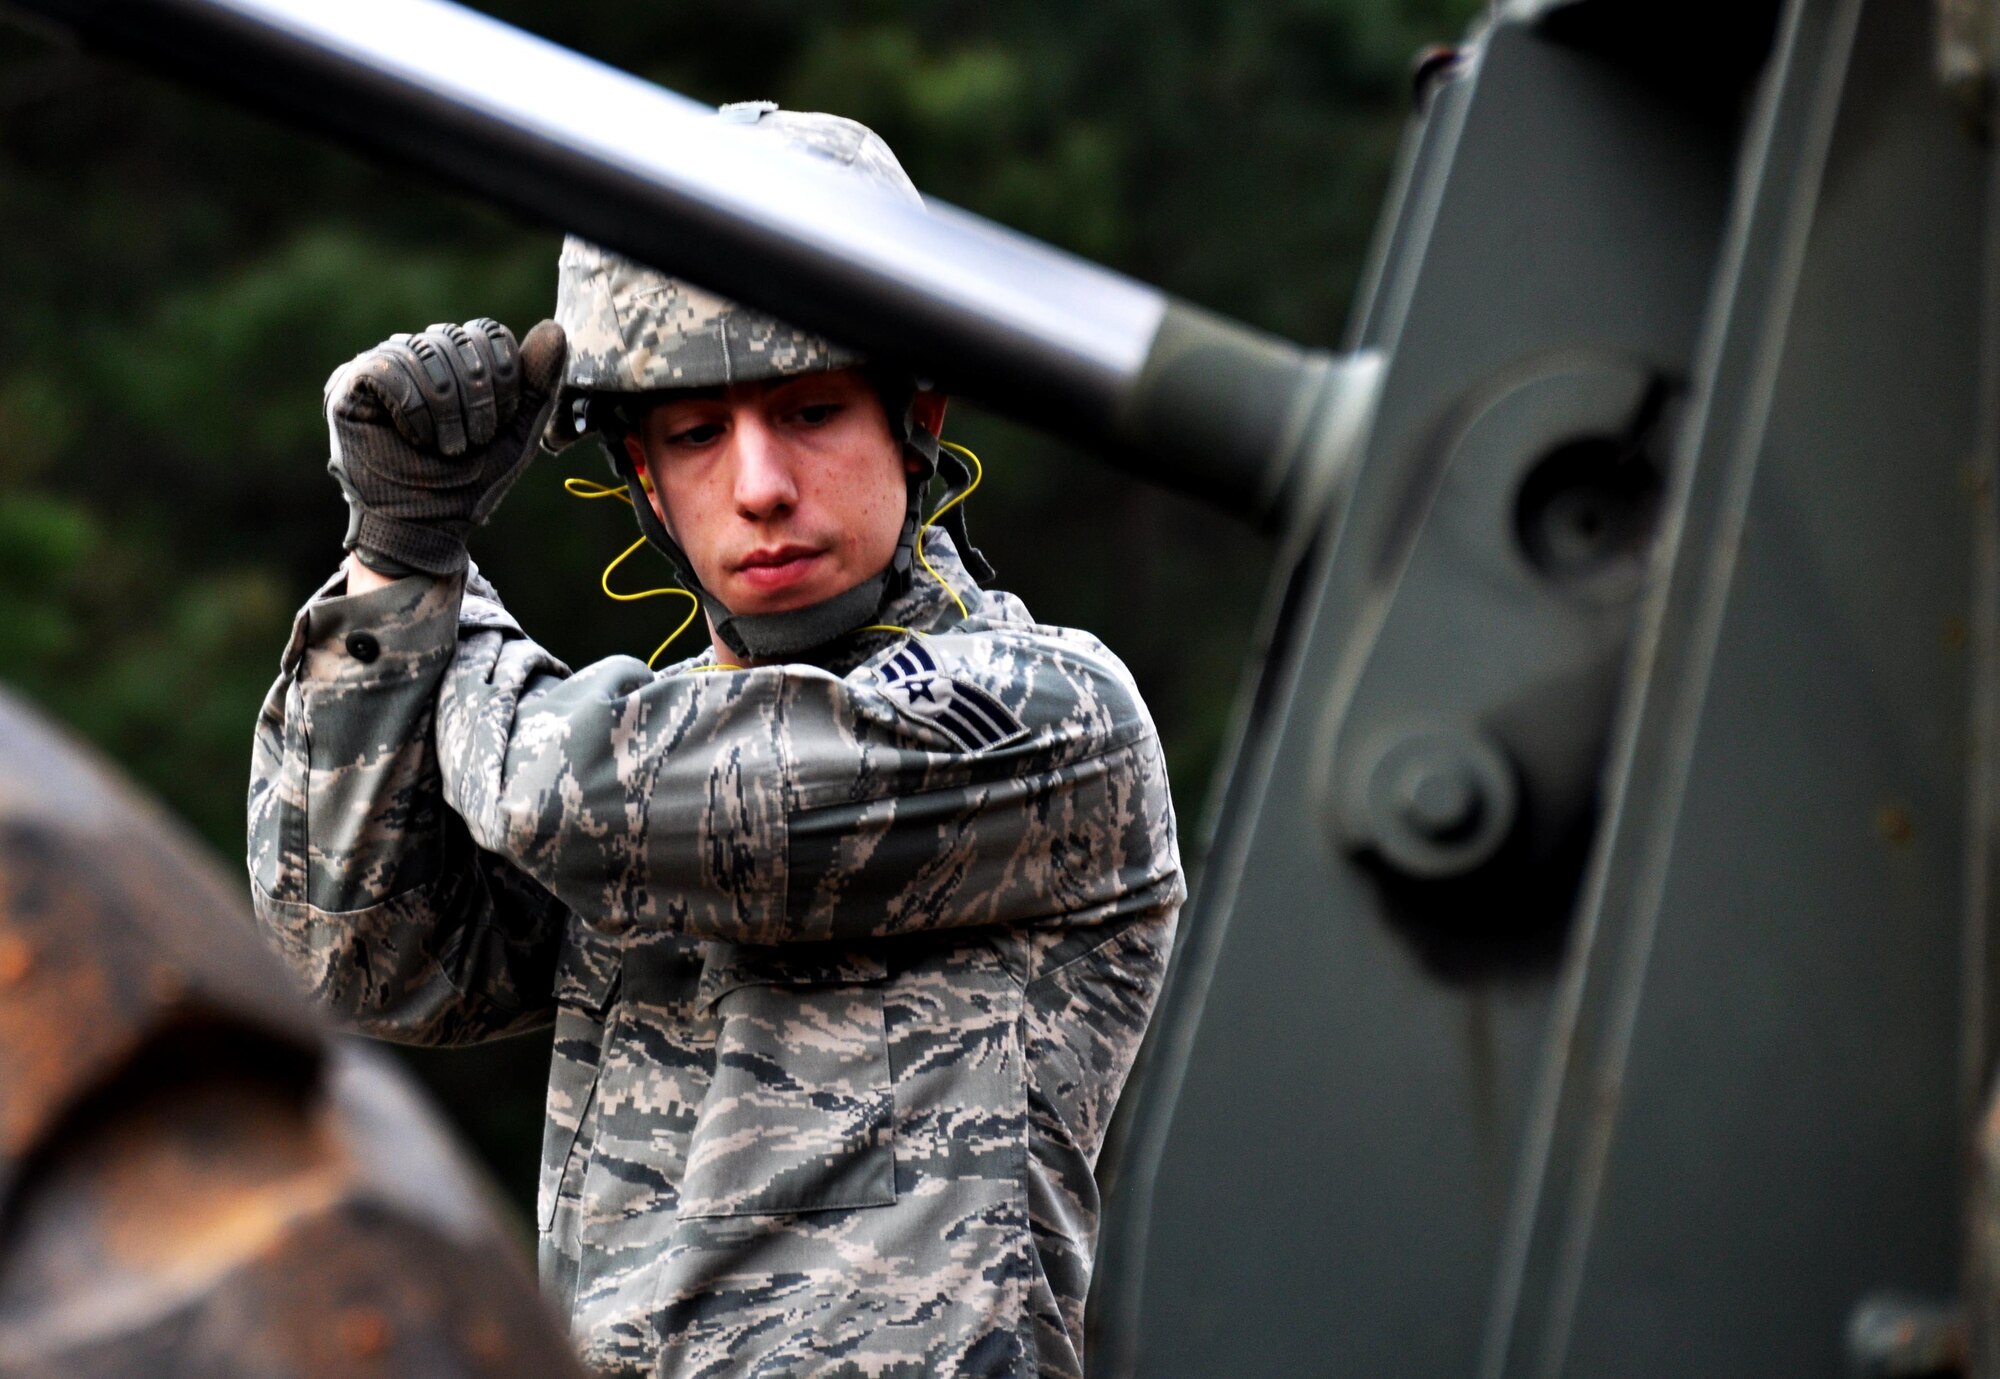 Senior Airmen Tyler Wright, 911th Force Support Squadron, Pittsburgh, Pa., guides Master Sgt. Mark Ansani, 911th FSS, as he drives a forklift during Force Support Silver Flag at Dobbins Air Reserve Base, Georgia, March 11, 2015. About 70 Airmen on teams from Peterson Air Force Base, Colorado; the 445th FSS from Wright-Patterson Air Force Base, Ohio; the 908th FSS from Maxwell AFB, Alabama; the 910th FSS from Youngstown ARB, Ohio; the 911th FSS from Pittsburgh, Pennsylvania; and the 934th FSS from Minneapolis – St. Paul, Minnesota competed in FS Silver Flag. (U.S. Air Force photo/Senior Airman Daniel Phelps)